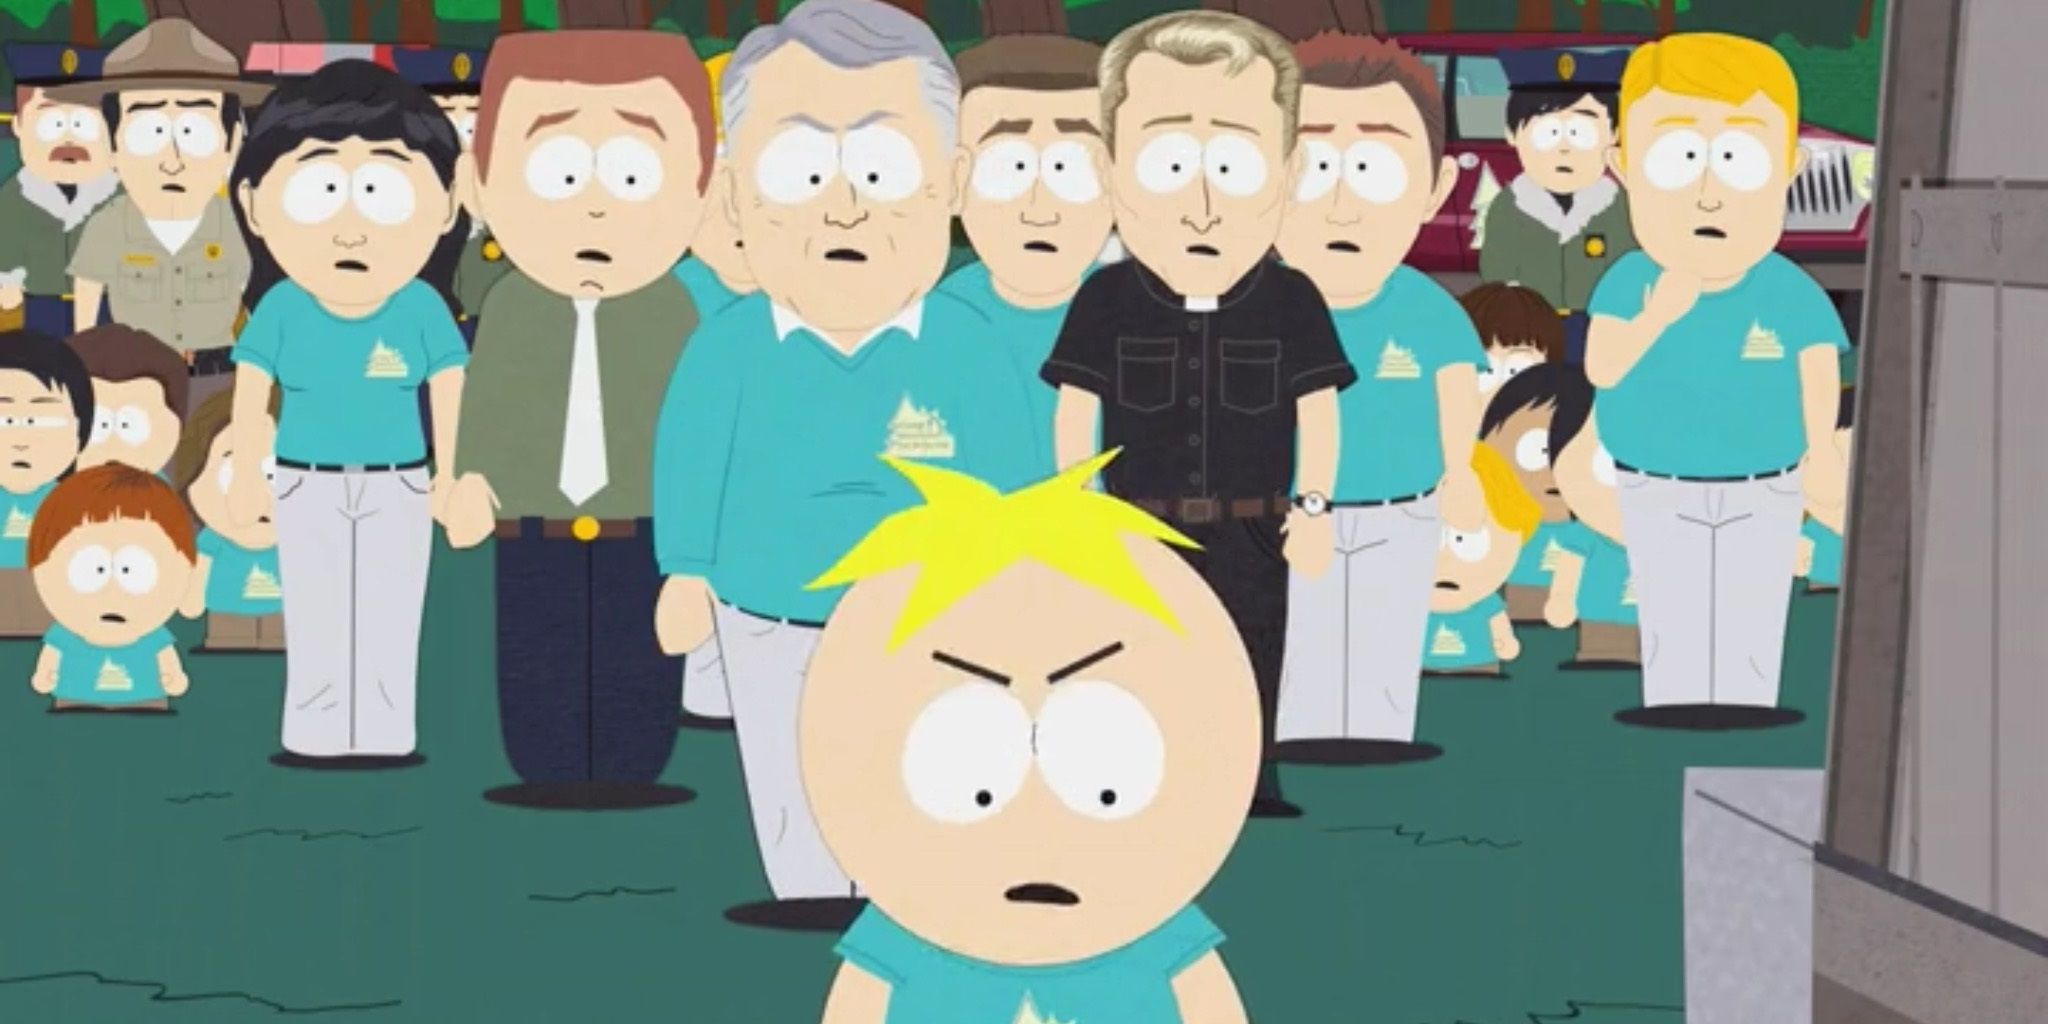 Butters at a gay conversion therapy camp in South Park